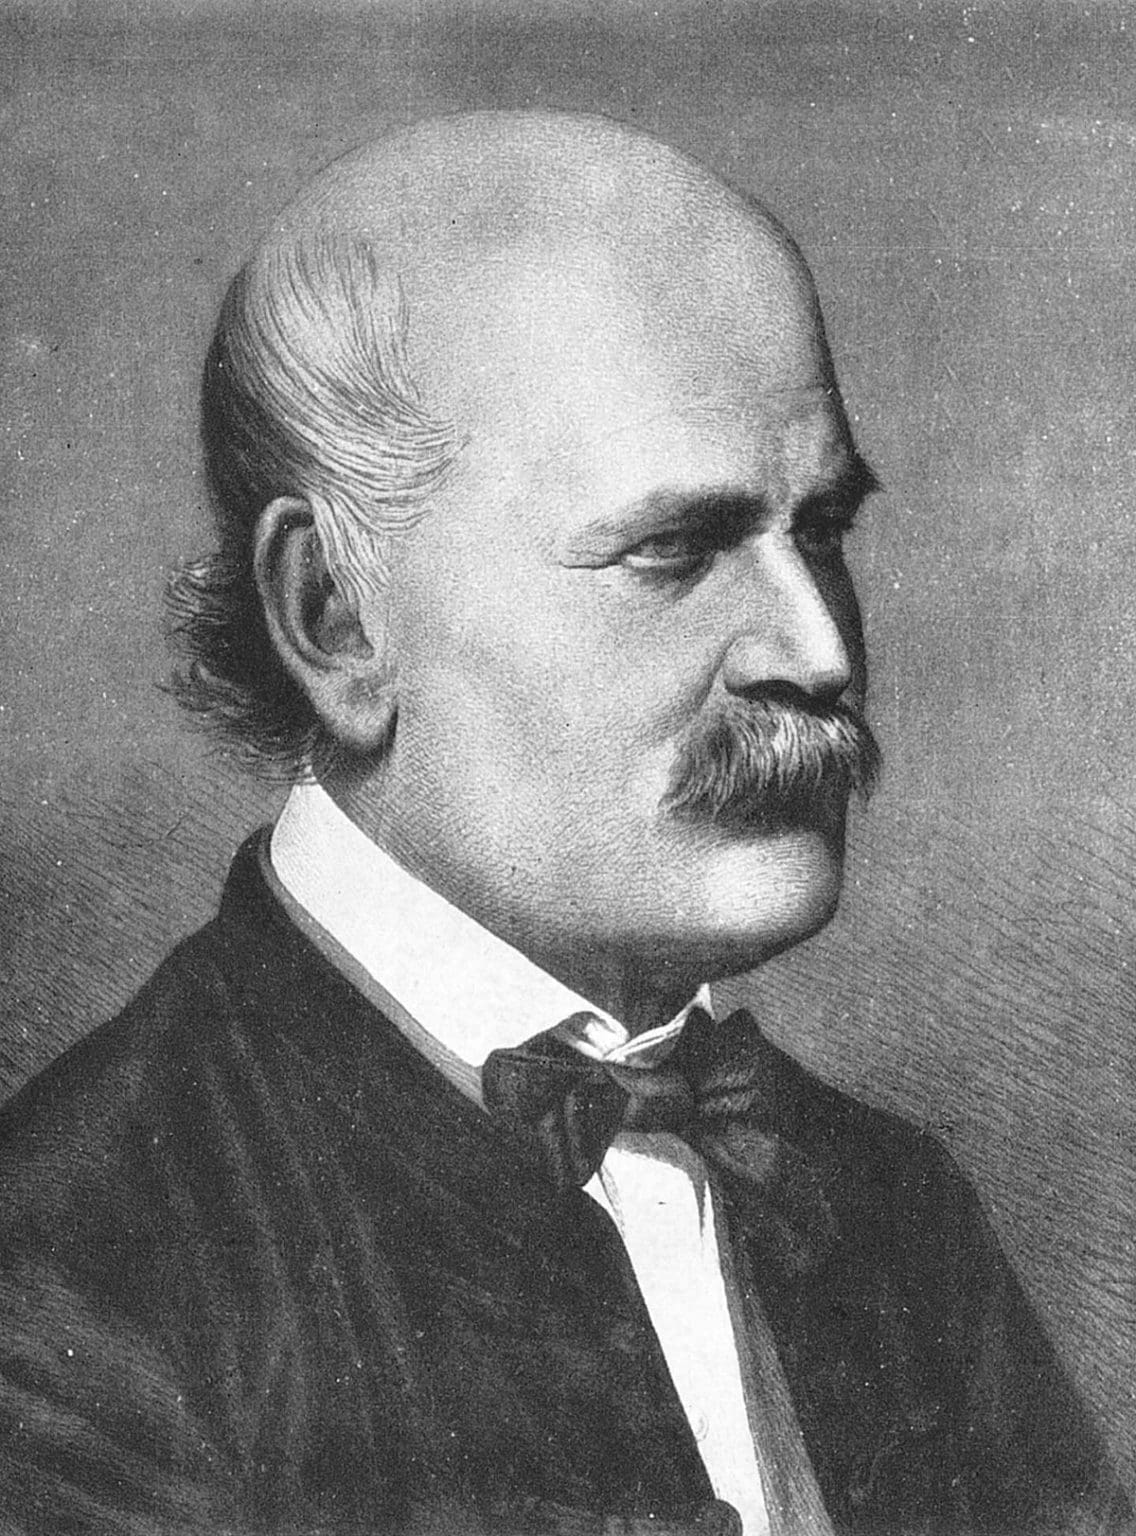 The Saviour of Mothers – Ignác Semmelweis and the Day Celebrating Hungarian Healthcare Professionals